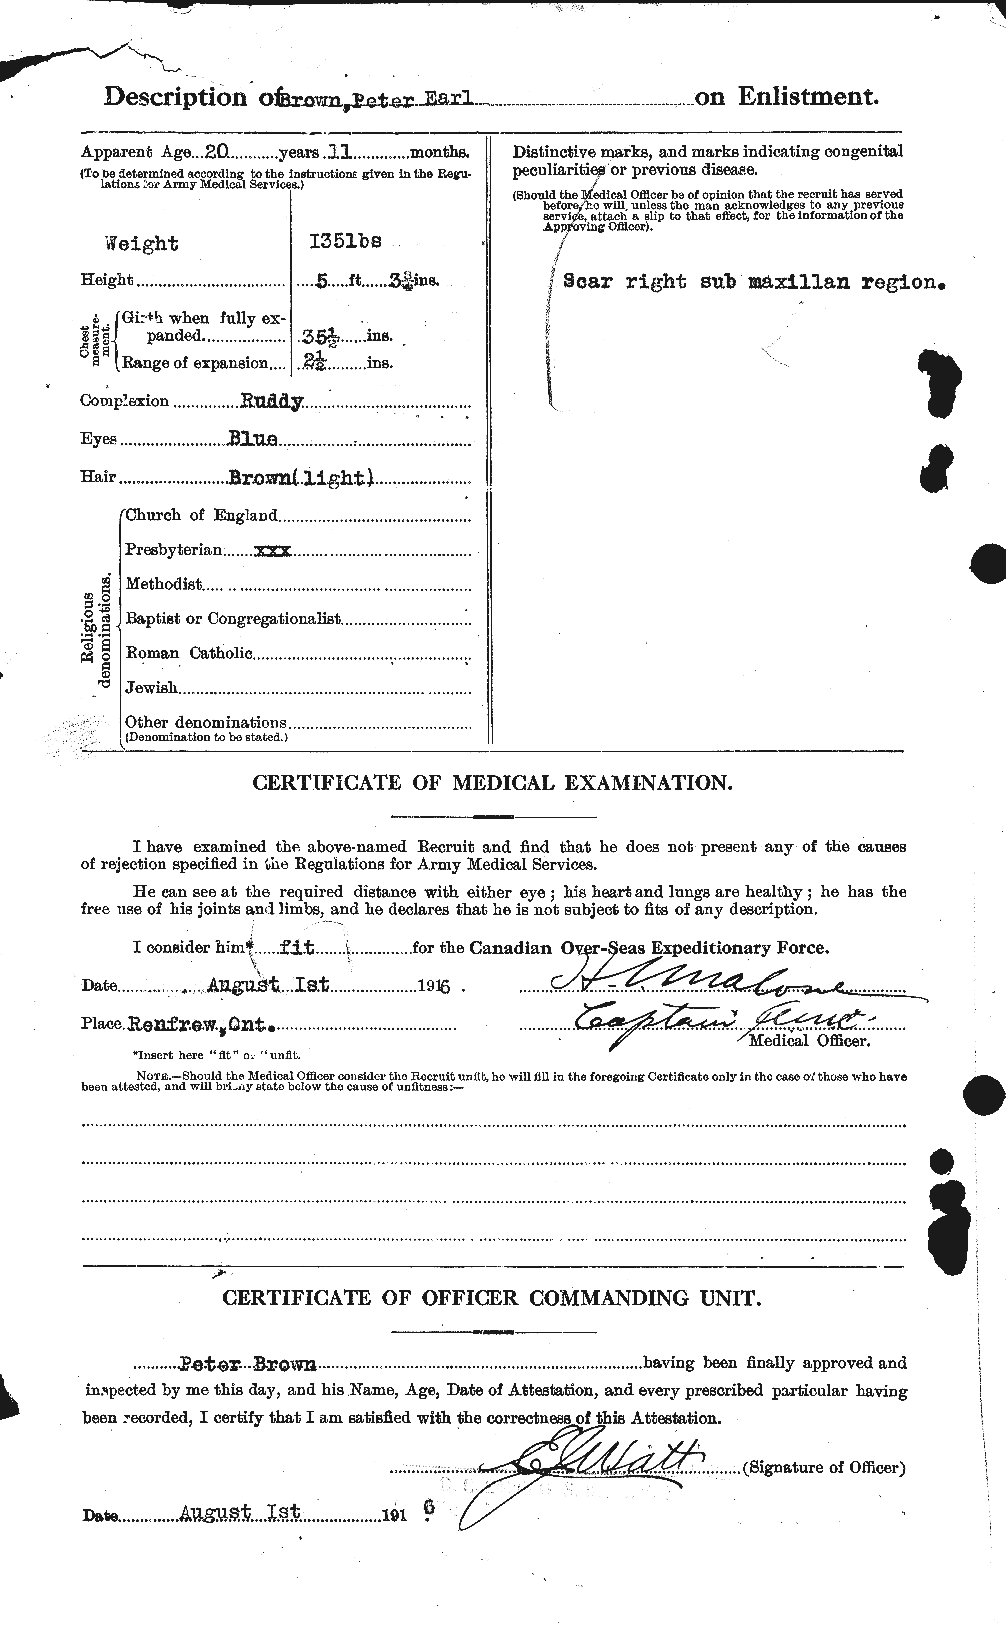 Personnel Records of the First World War - CEF 267204b